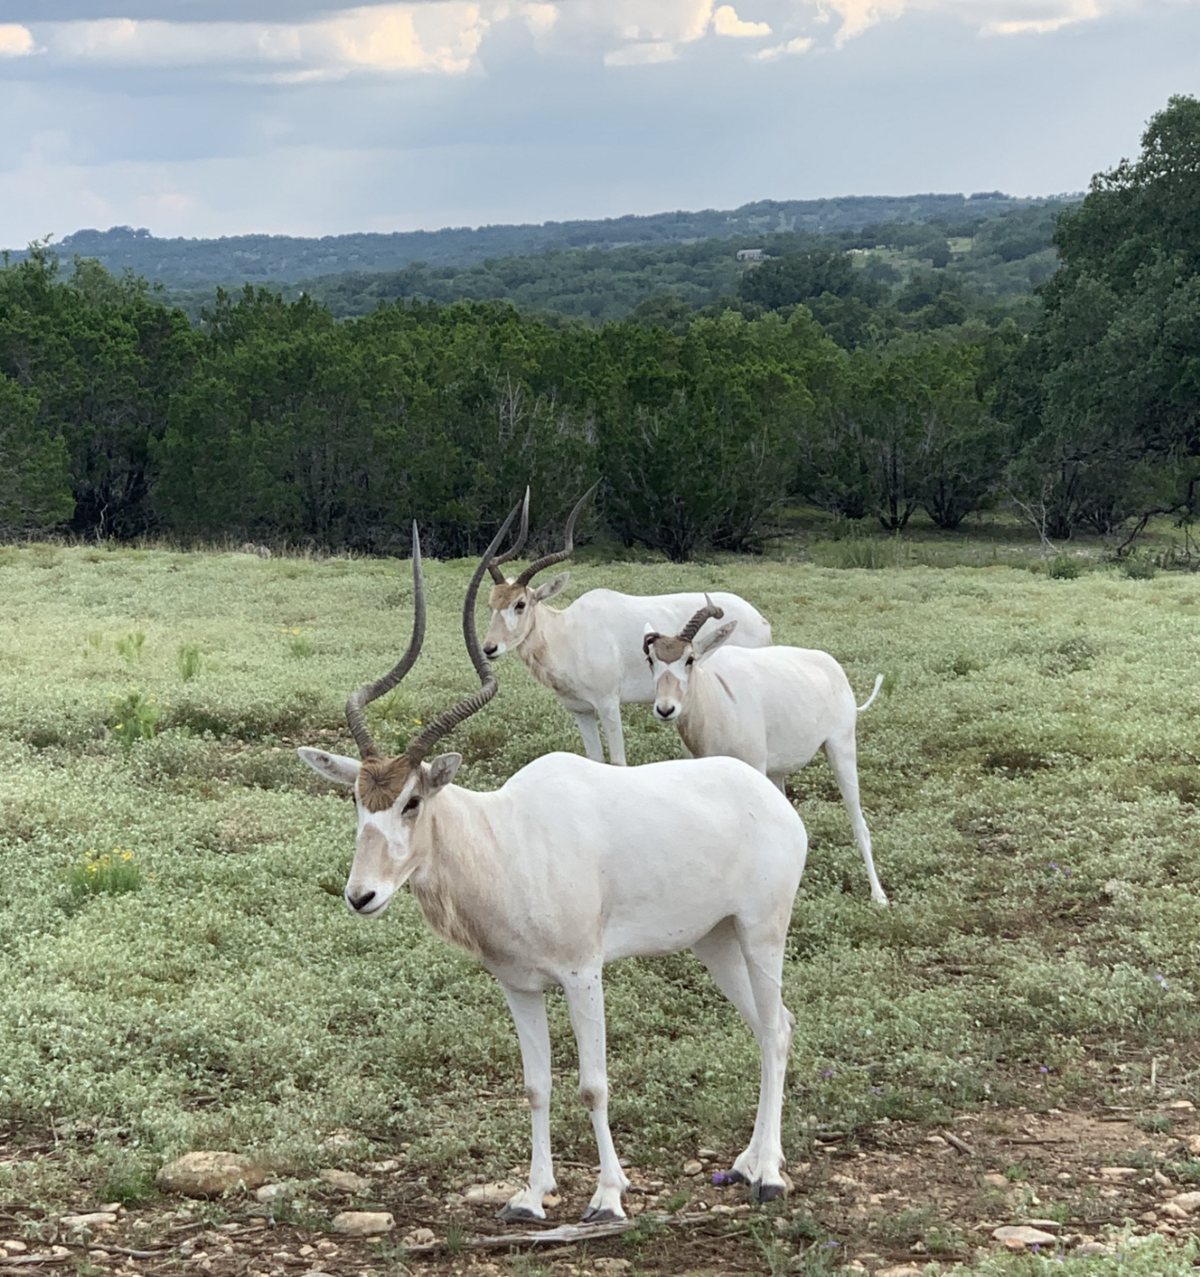 White antelope standing outside in Texas Hill Country